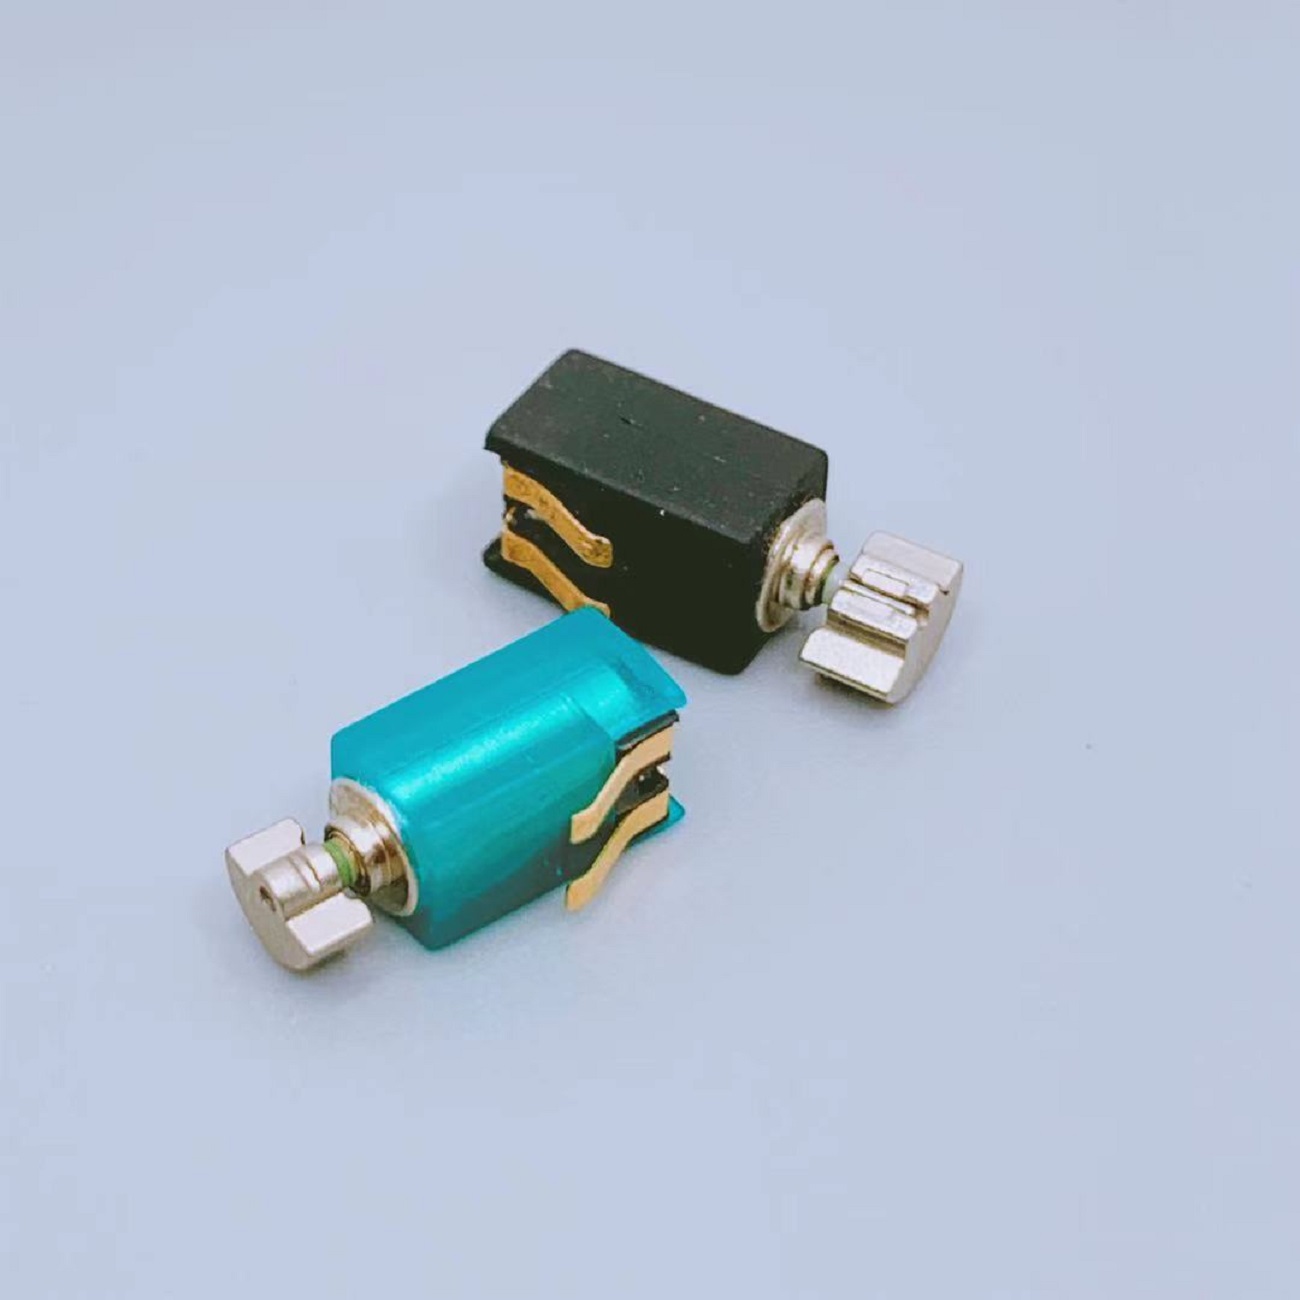 China Factory for Flat Vibration Motor -
 Micro DC motors Manufacturers,Supplier,China | LEADER – Leader Microelectronics